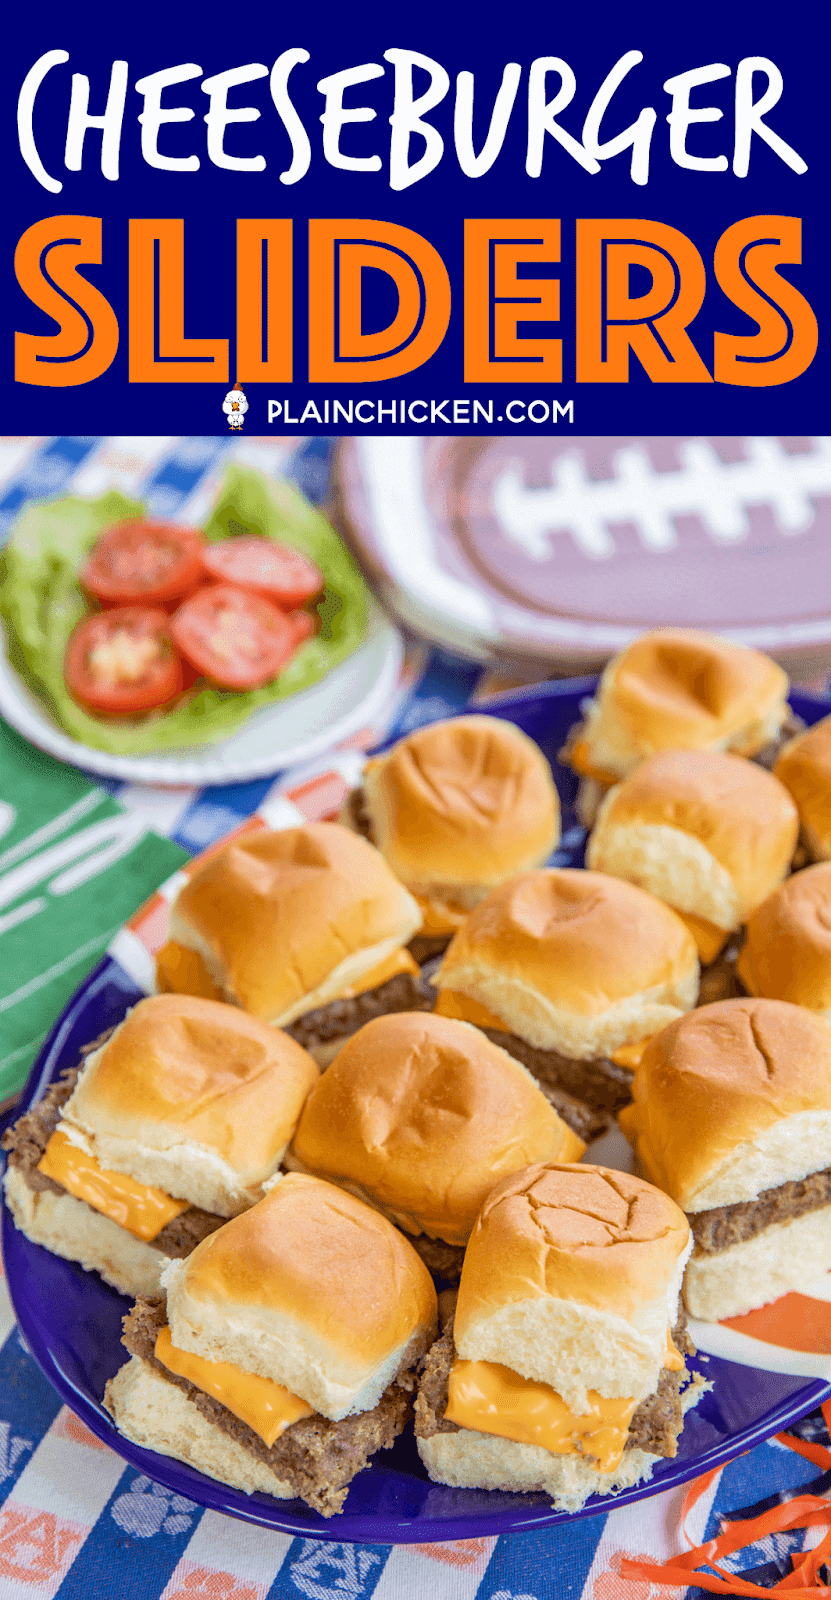 Cheeseburger Sliders - only 5 ingredients!! Ground beef, sausage, ranch dressing mix, cheese and buns. PERFECT for tailgating and parties!! Can make ahead of time and heat in the oven or on top of the grill when ready to serve. Top with your favorite burger toppings - lettuce, tomato, bacon, pickles, mayo, ketchup, mustard. SO easy and SOOOO good!!! Seriously our favorite burger recipe! #tailgating #burgers #beef #partyfood